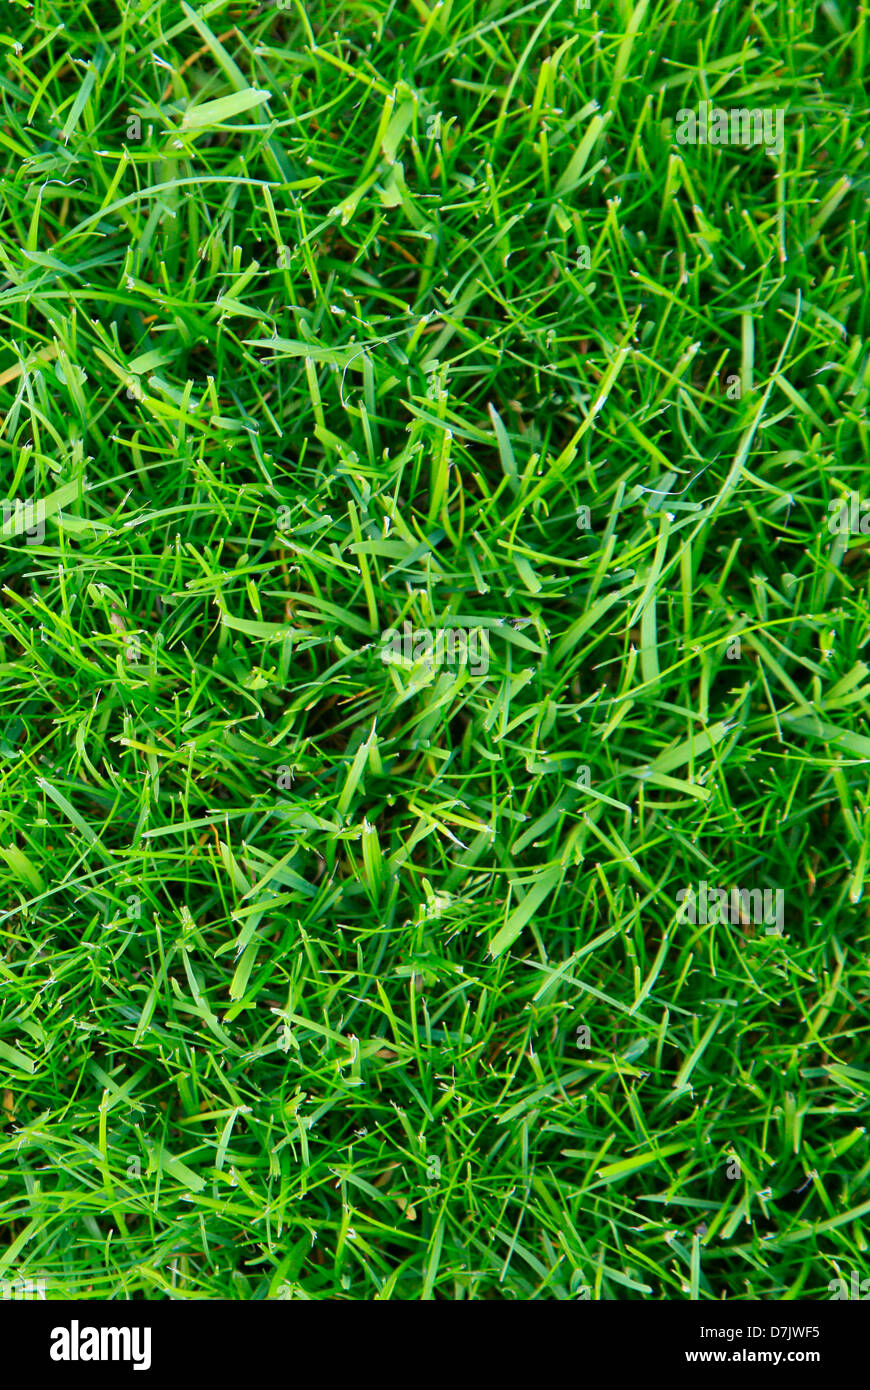 Looking down on freshly mowed cultivated grass. Glenagles golf course, UK Stock Photo